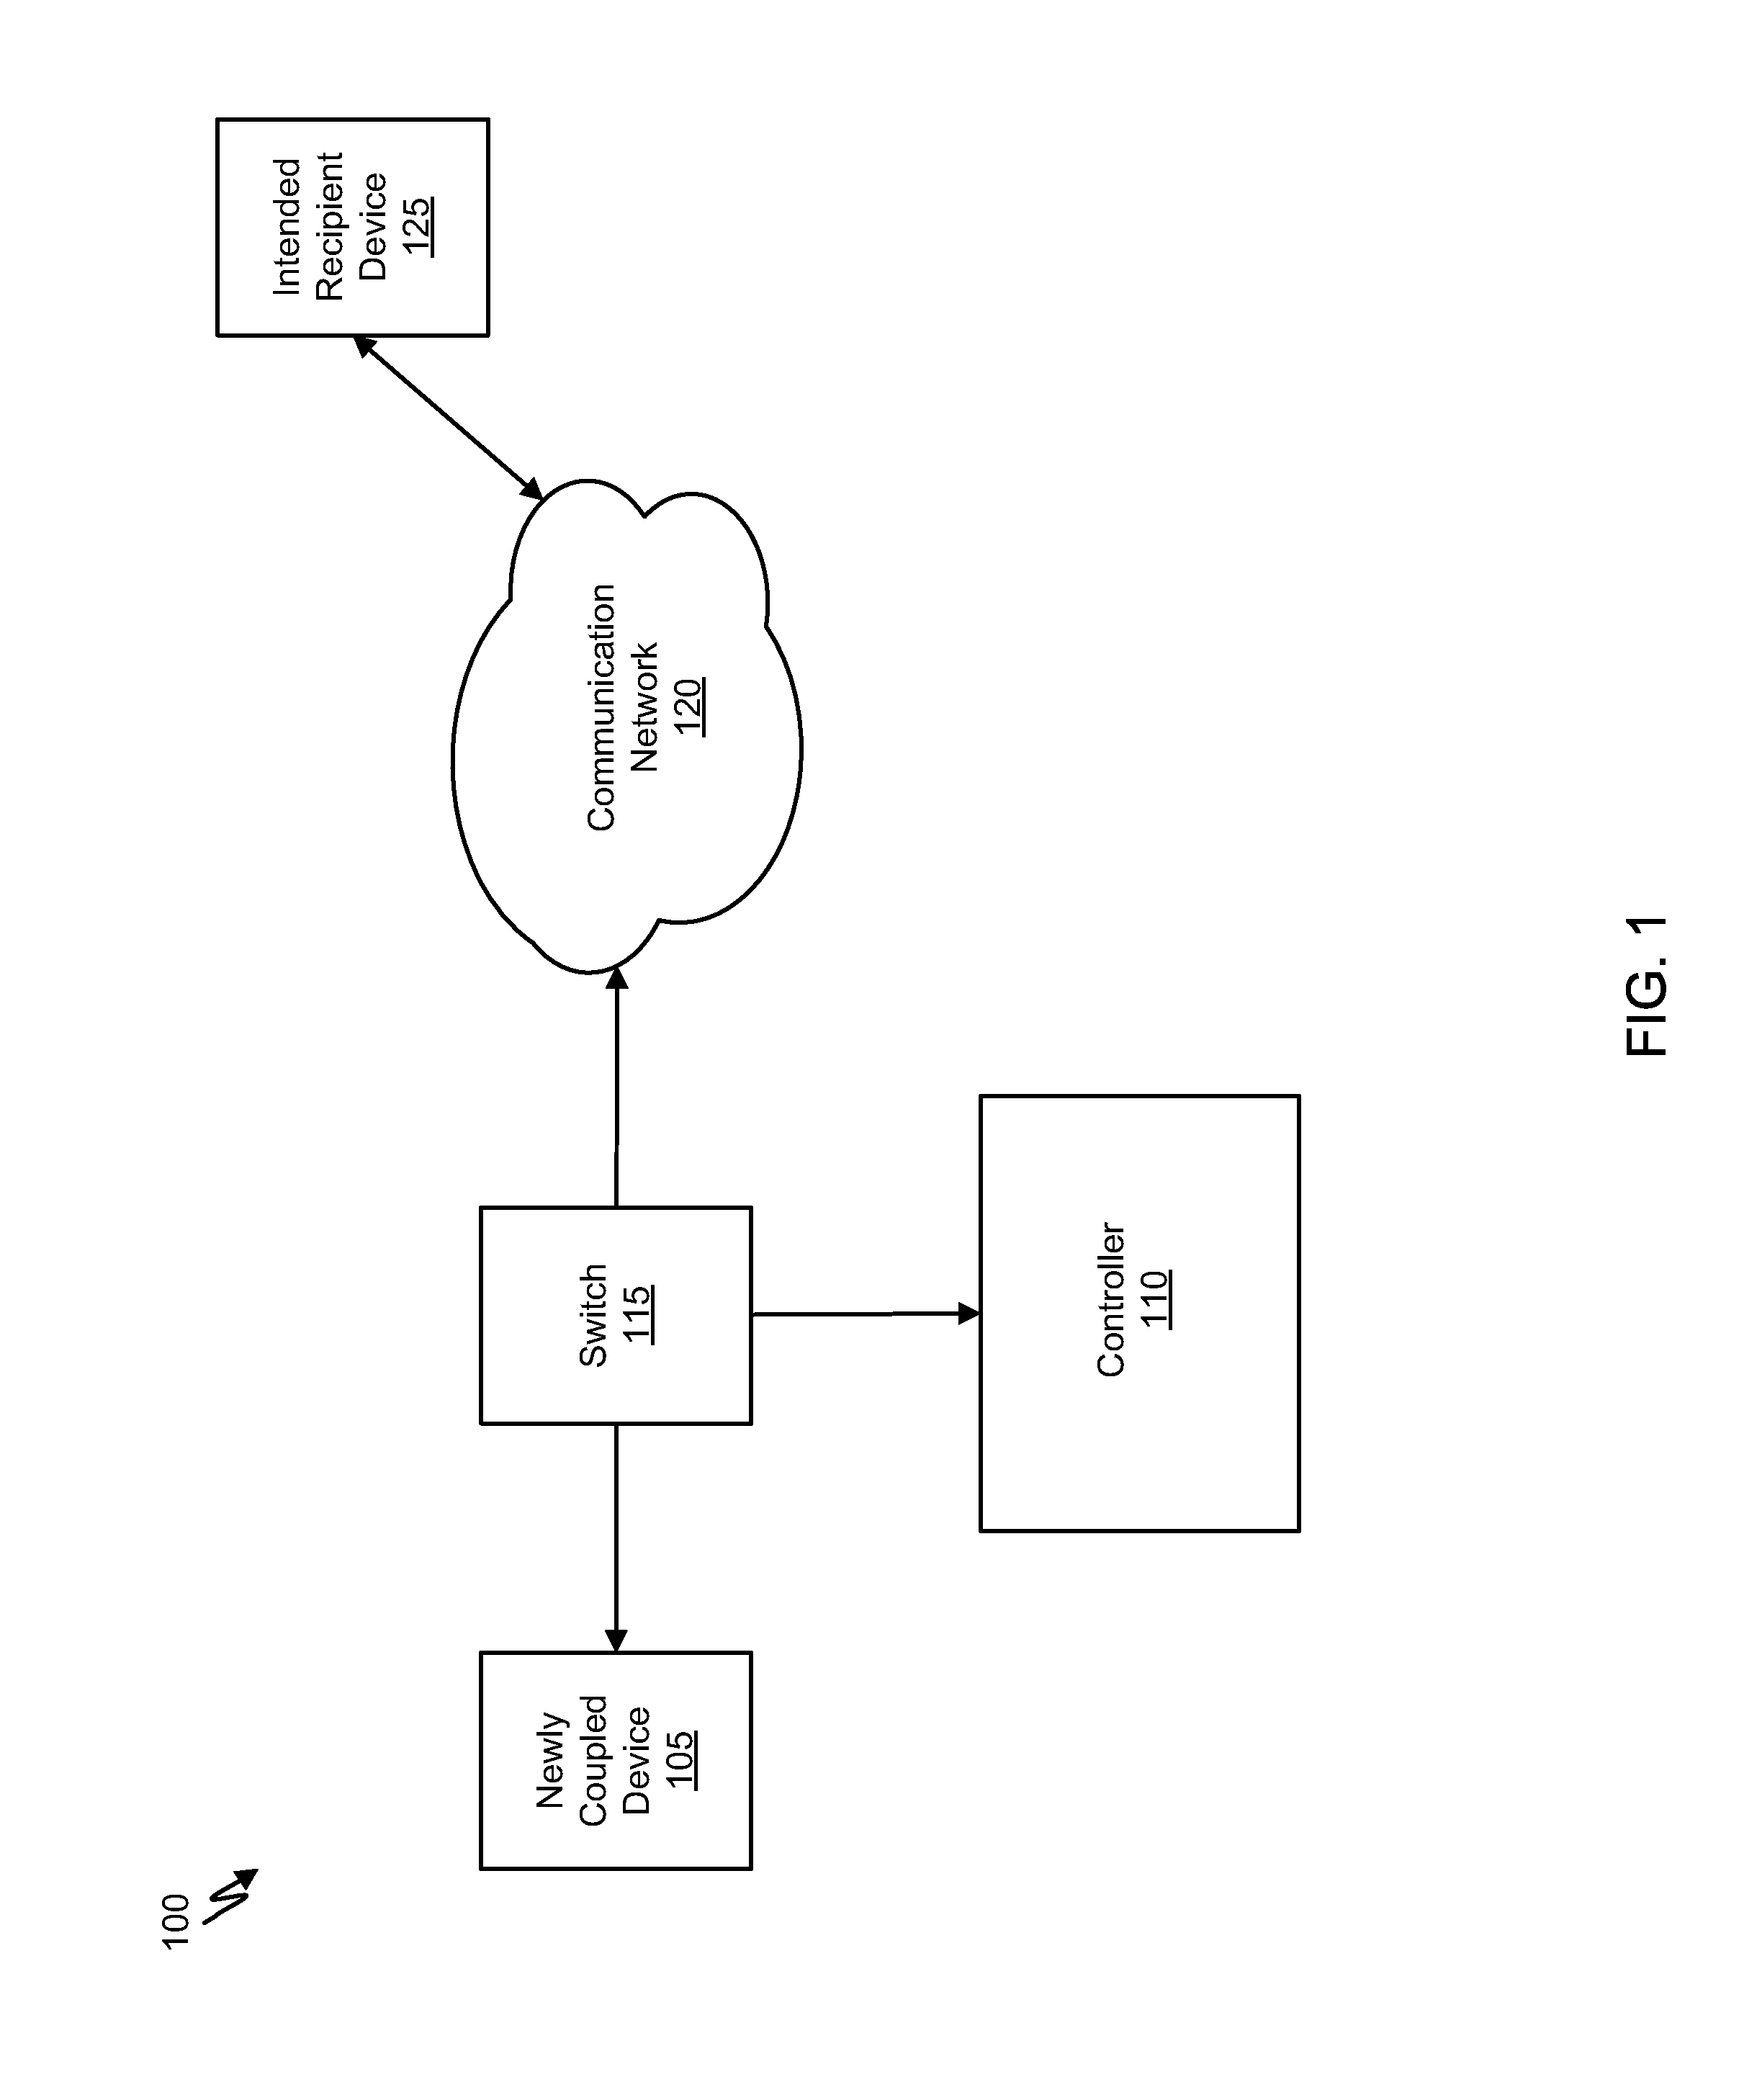 System and method for malware containment